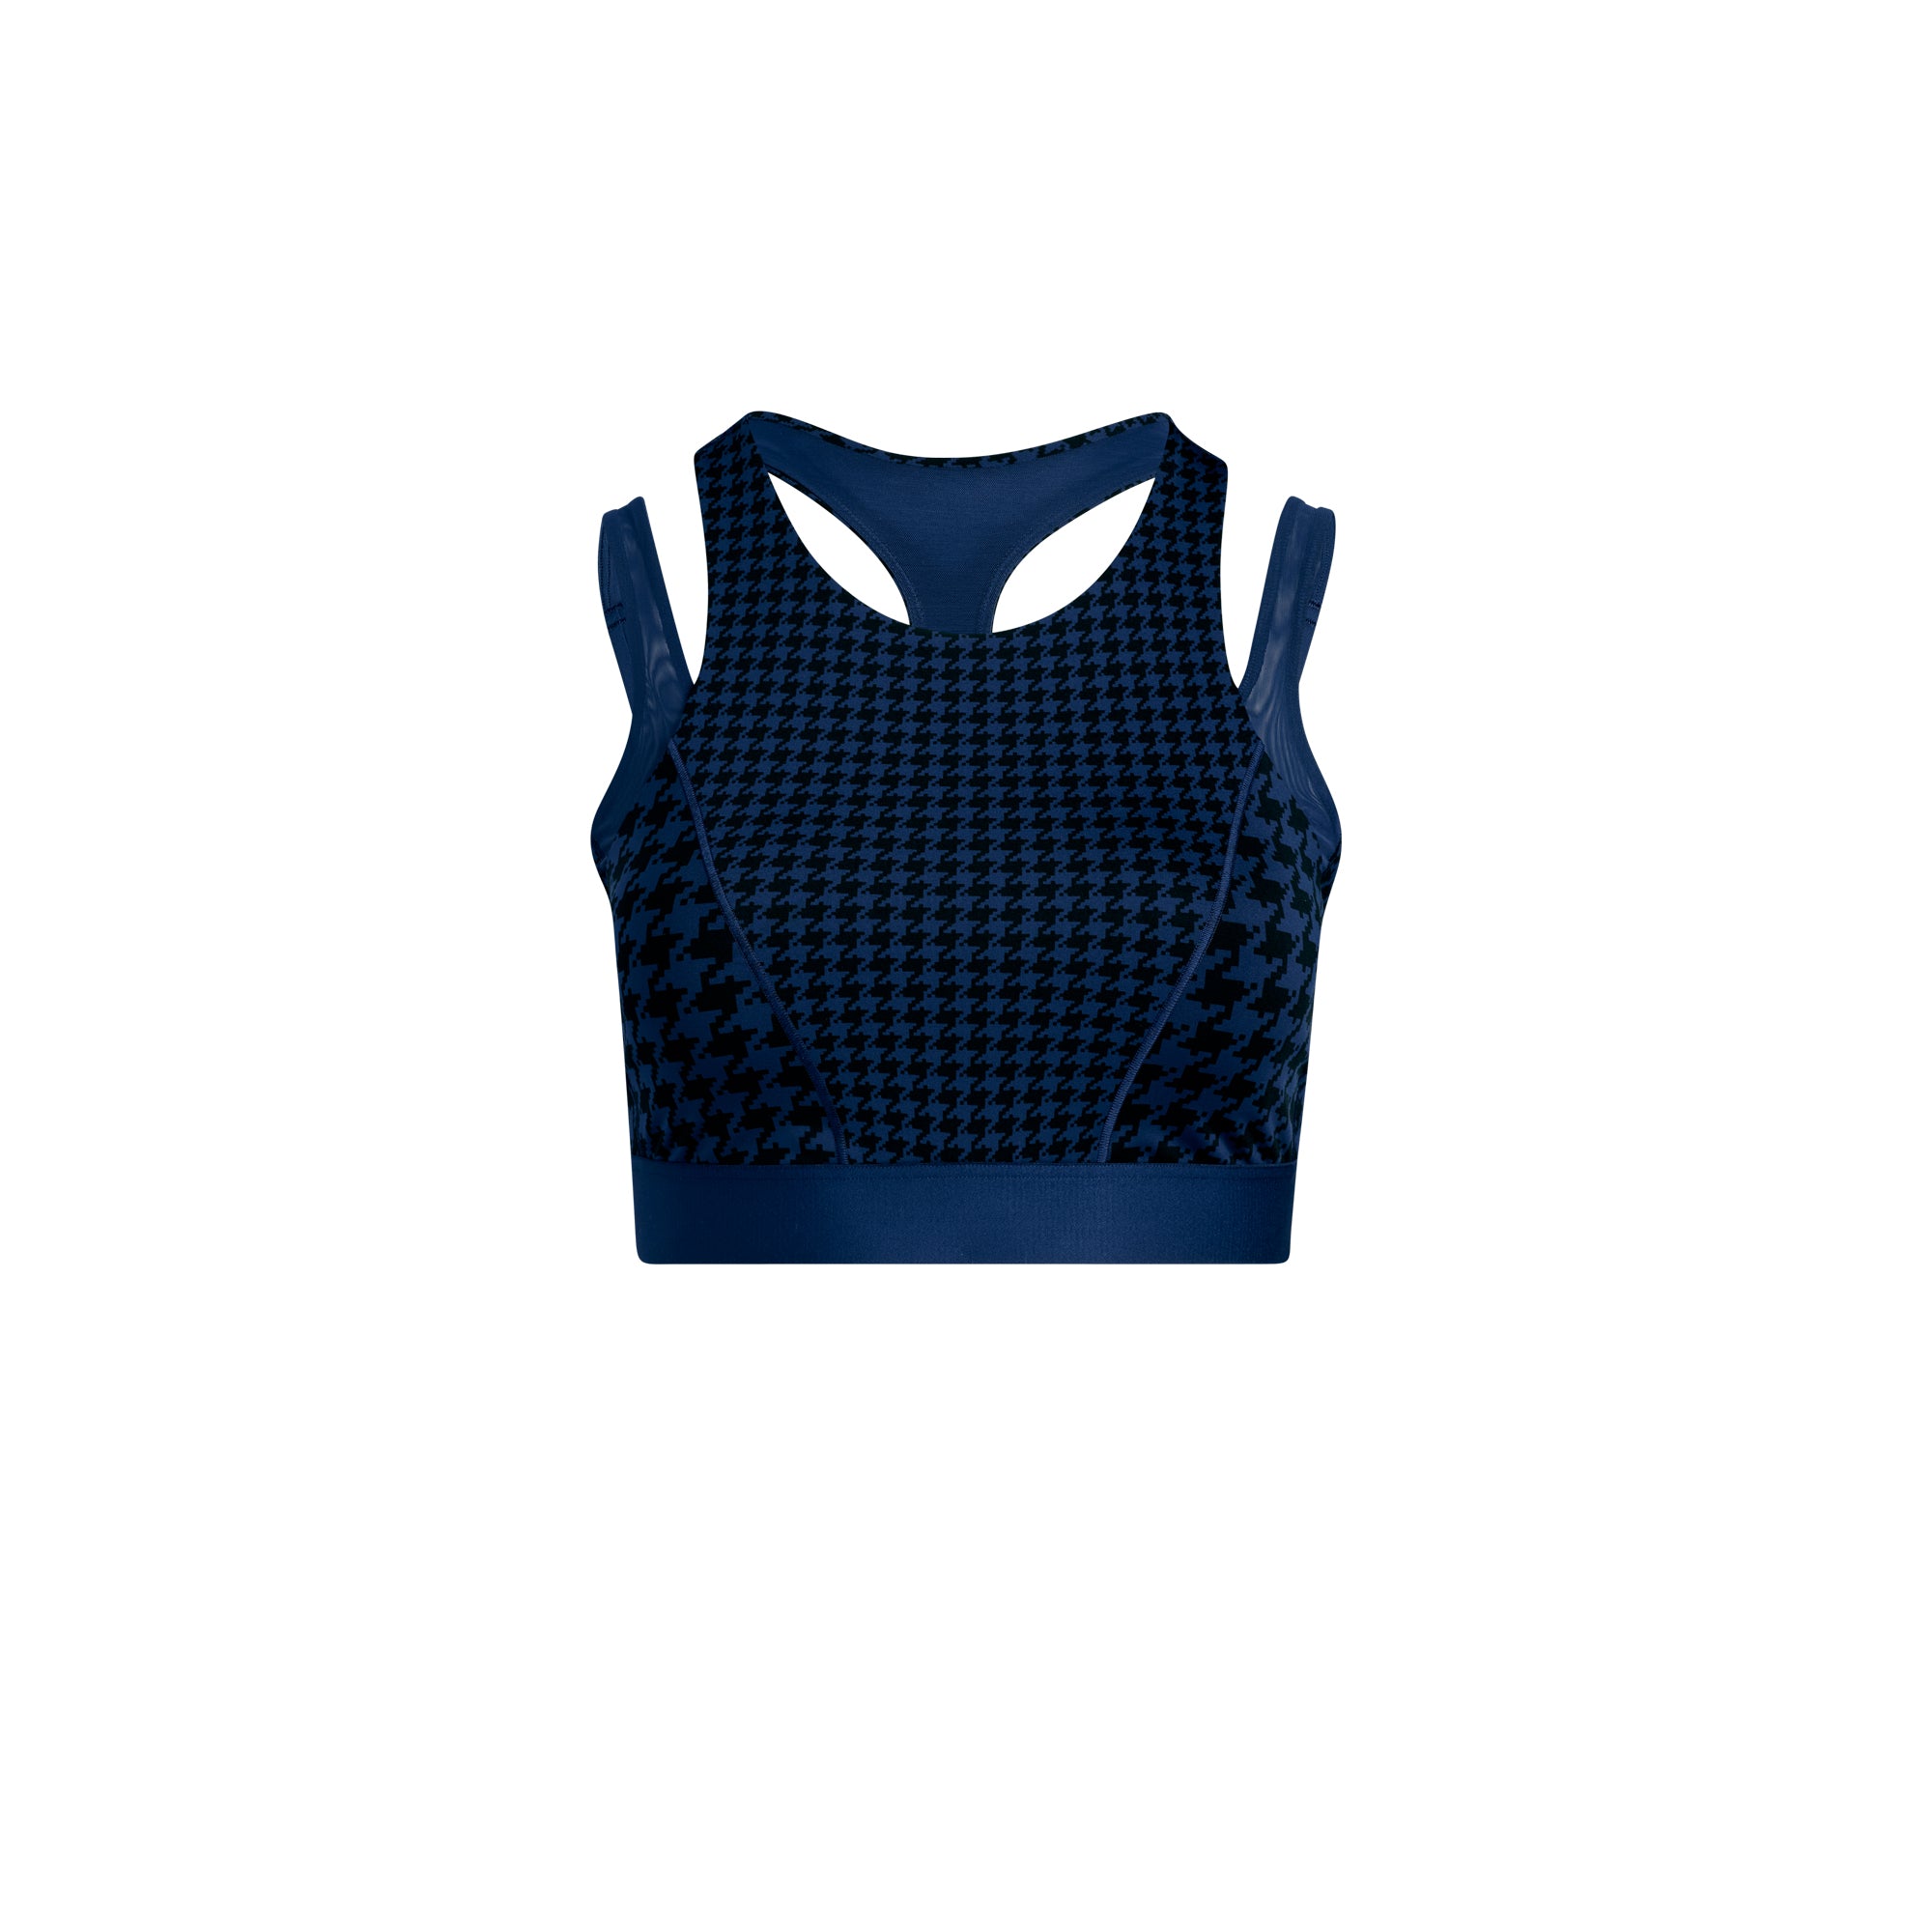 Adidas X Ivy Park Ivy Park Cut Out Bra Top In Blue